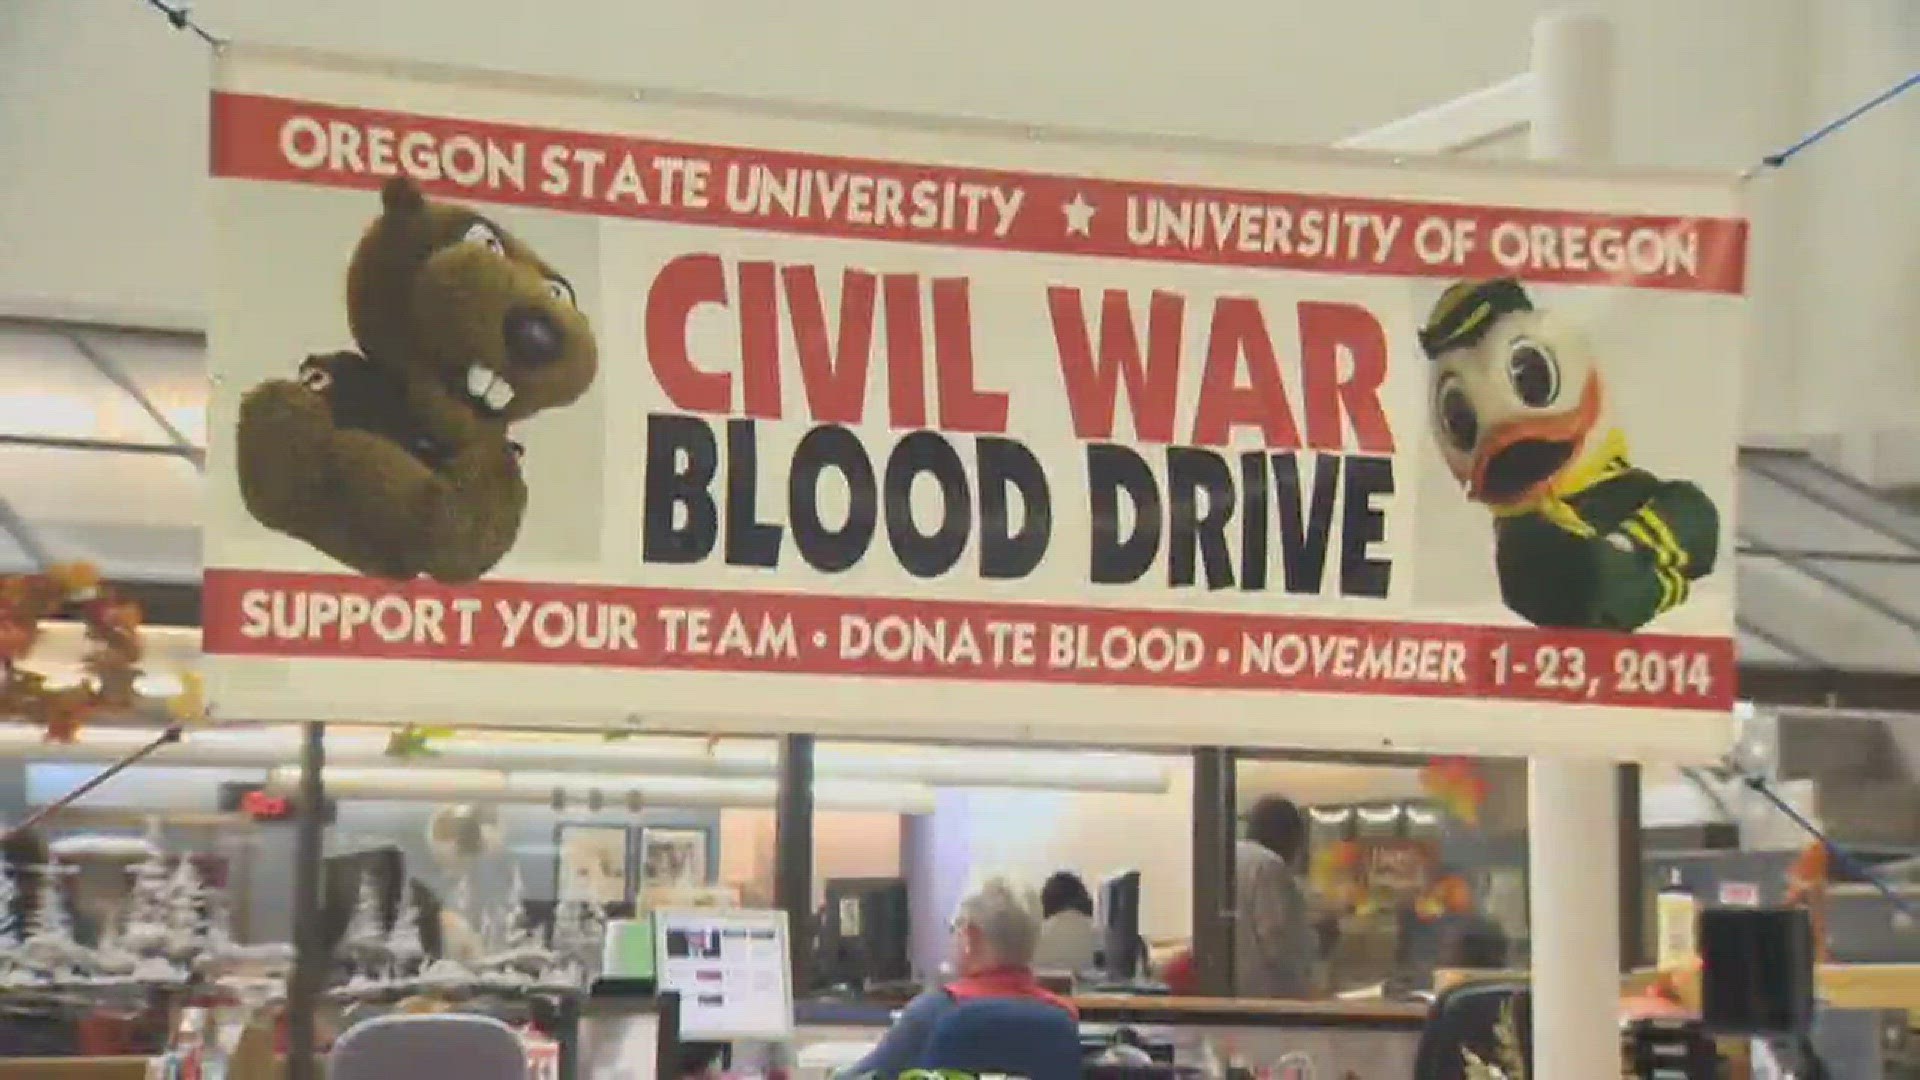 Civil War Blood Drive almost over